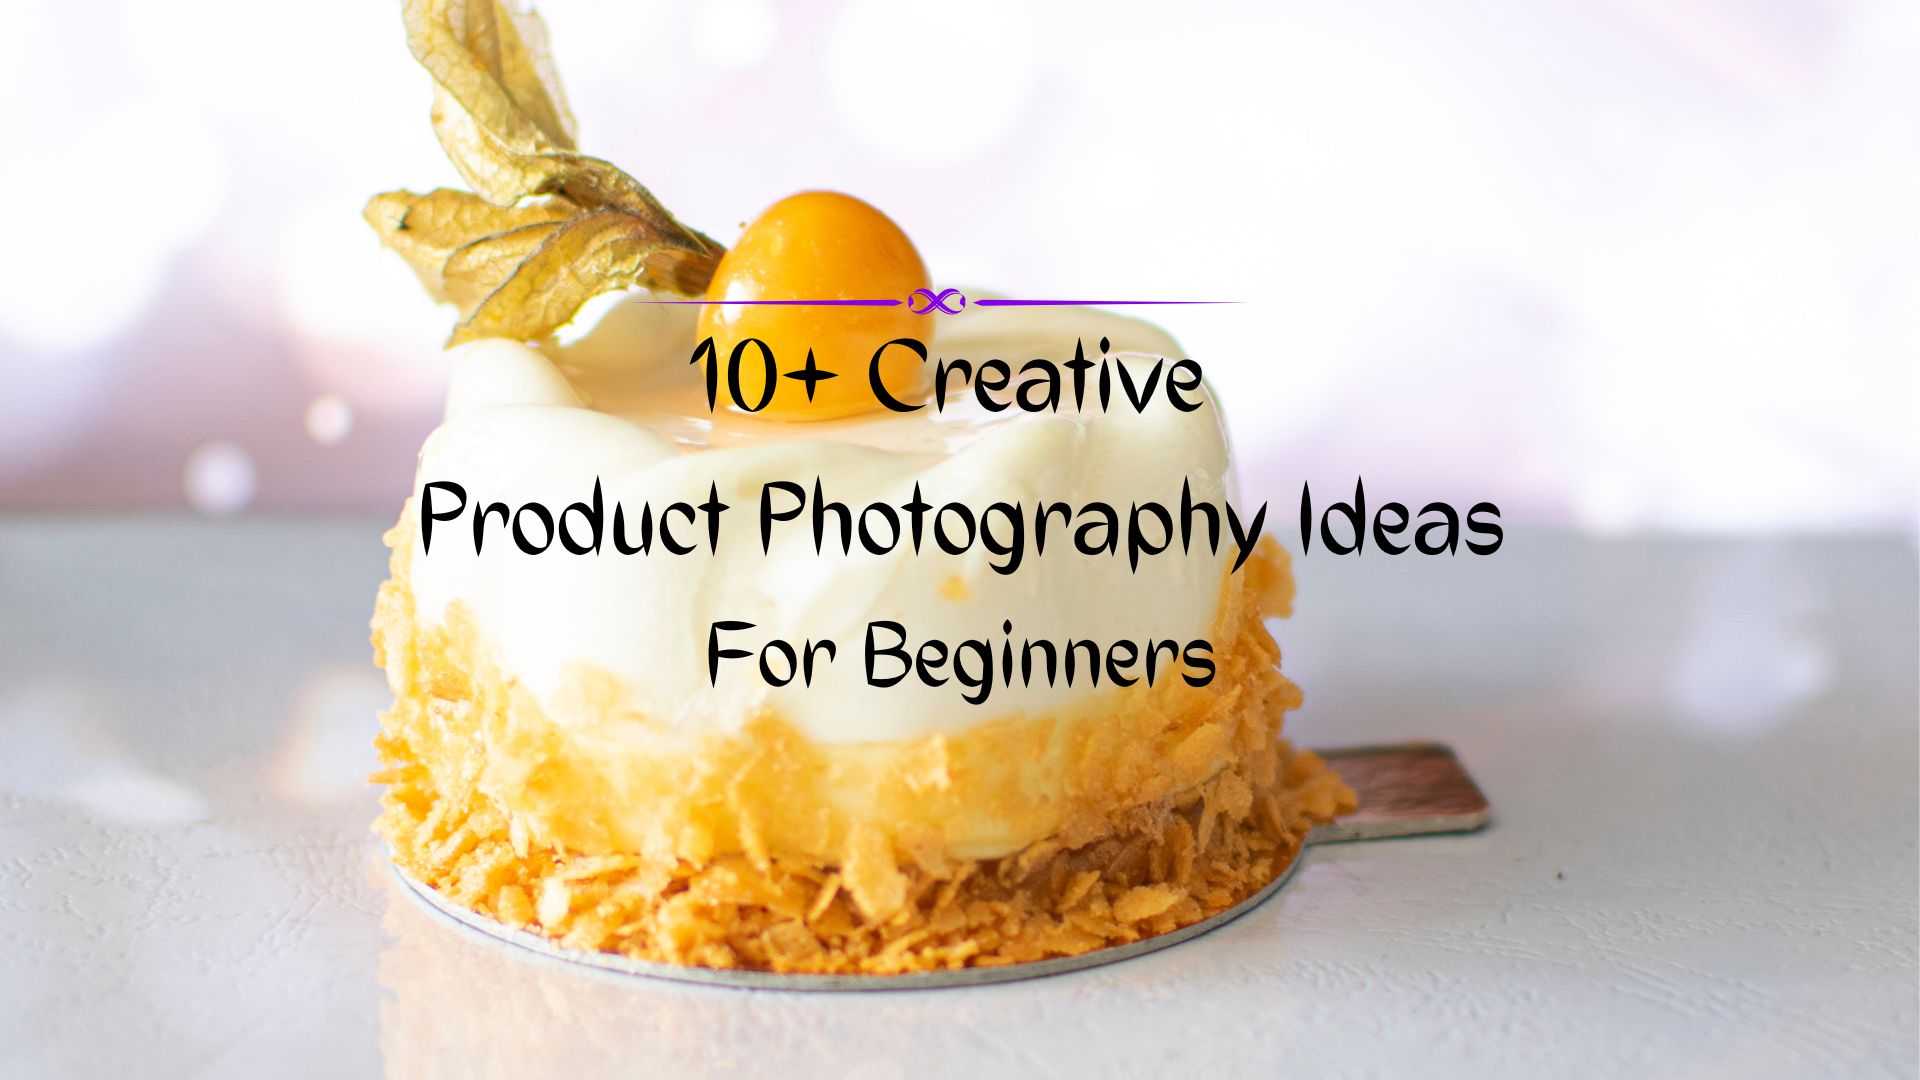 10+ Creative Product Photography Ideas For Beginners